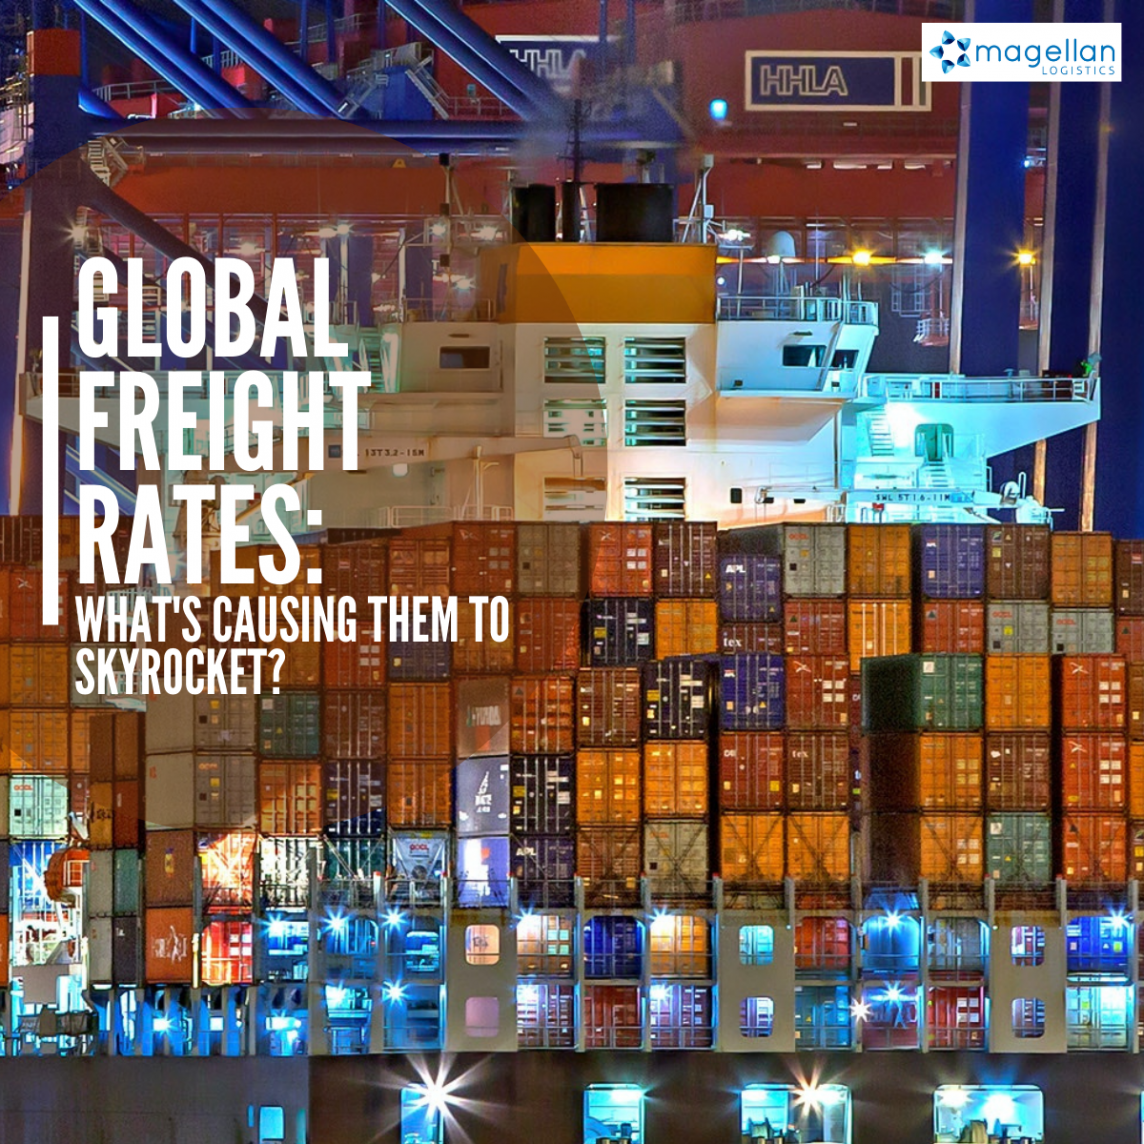 Global Freight Rates: What’s causing them skyrocket?